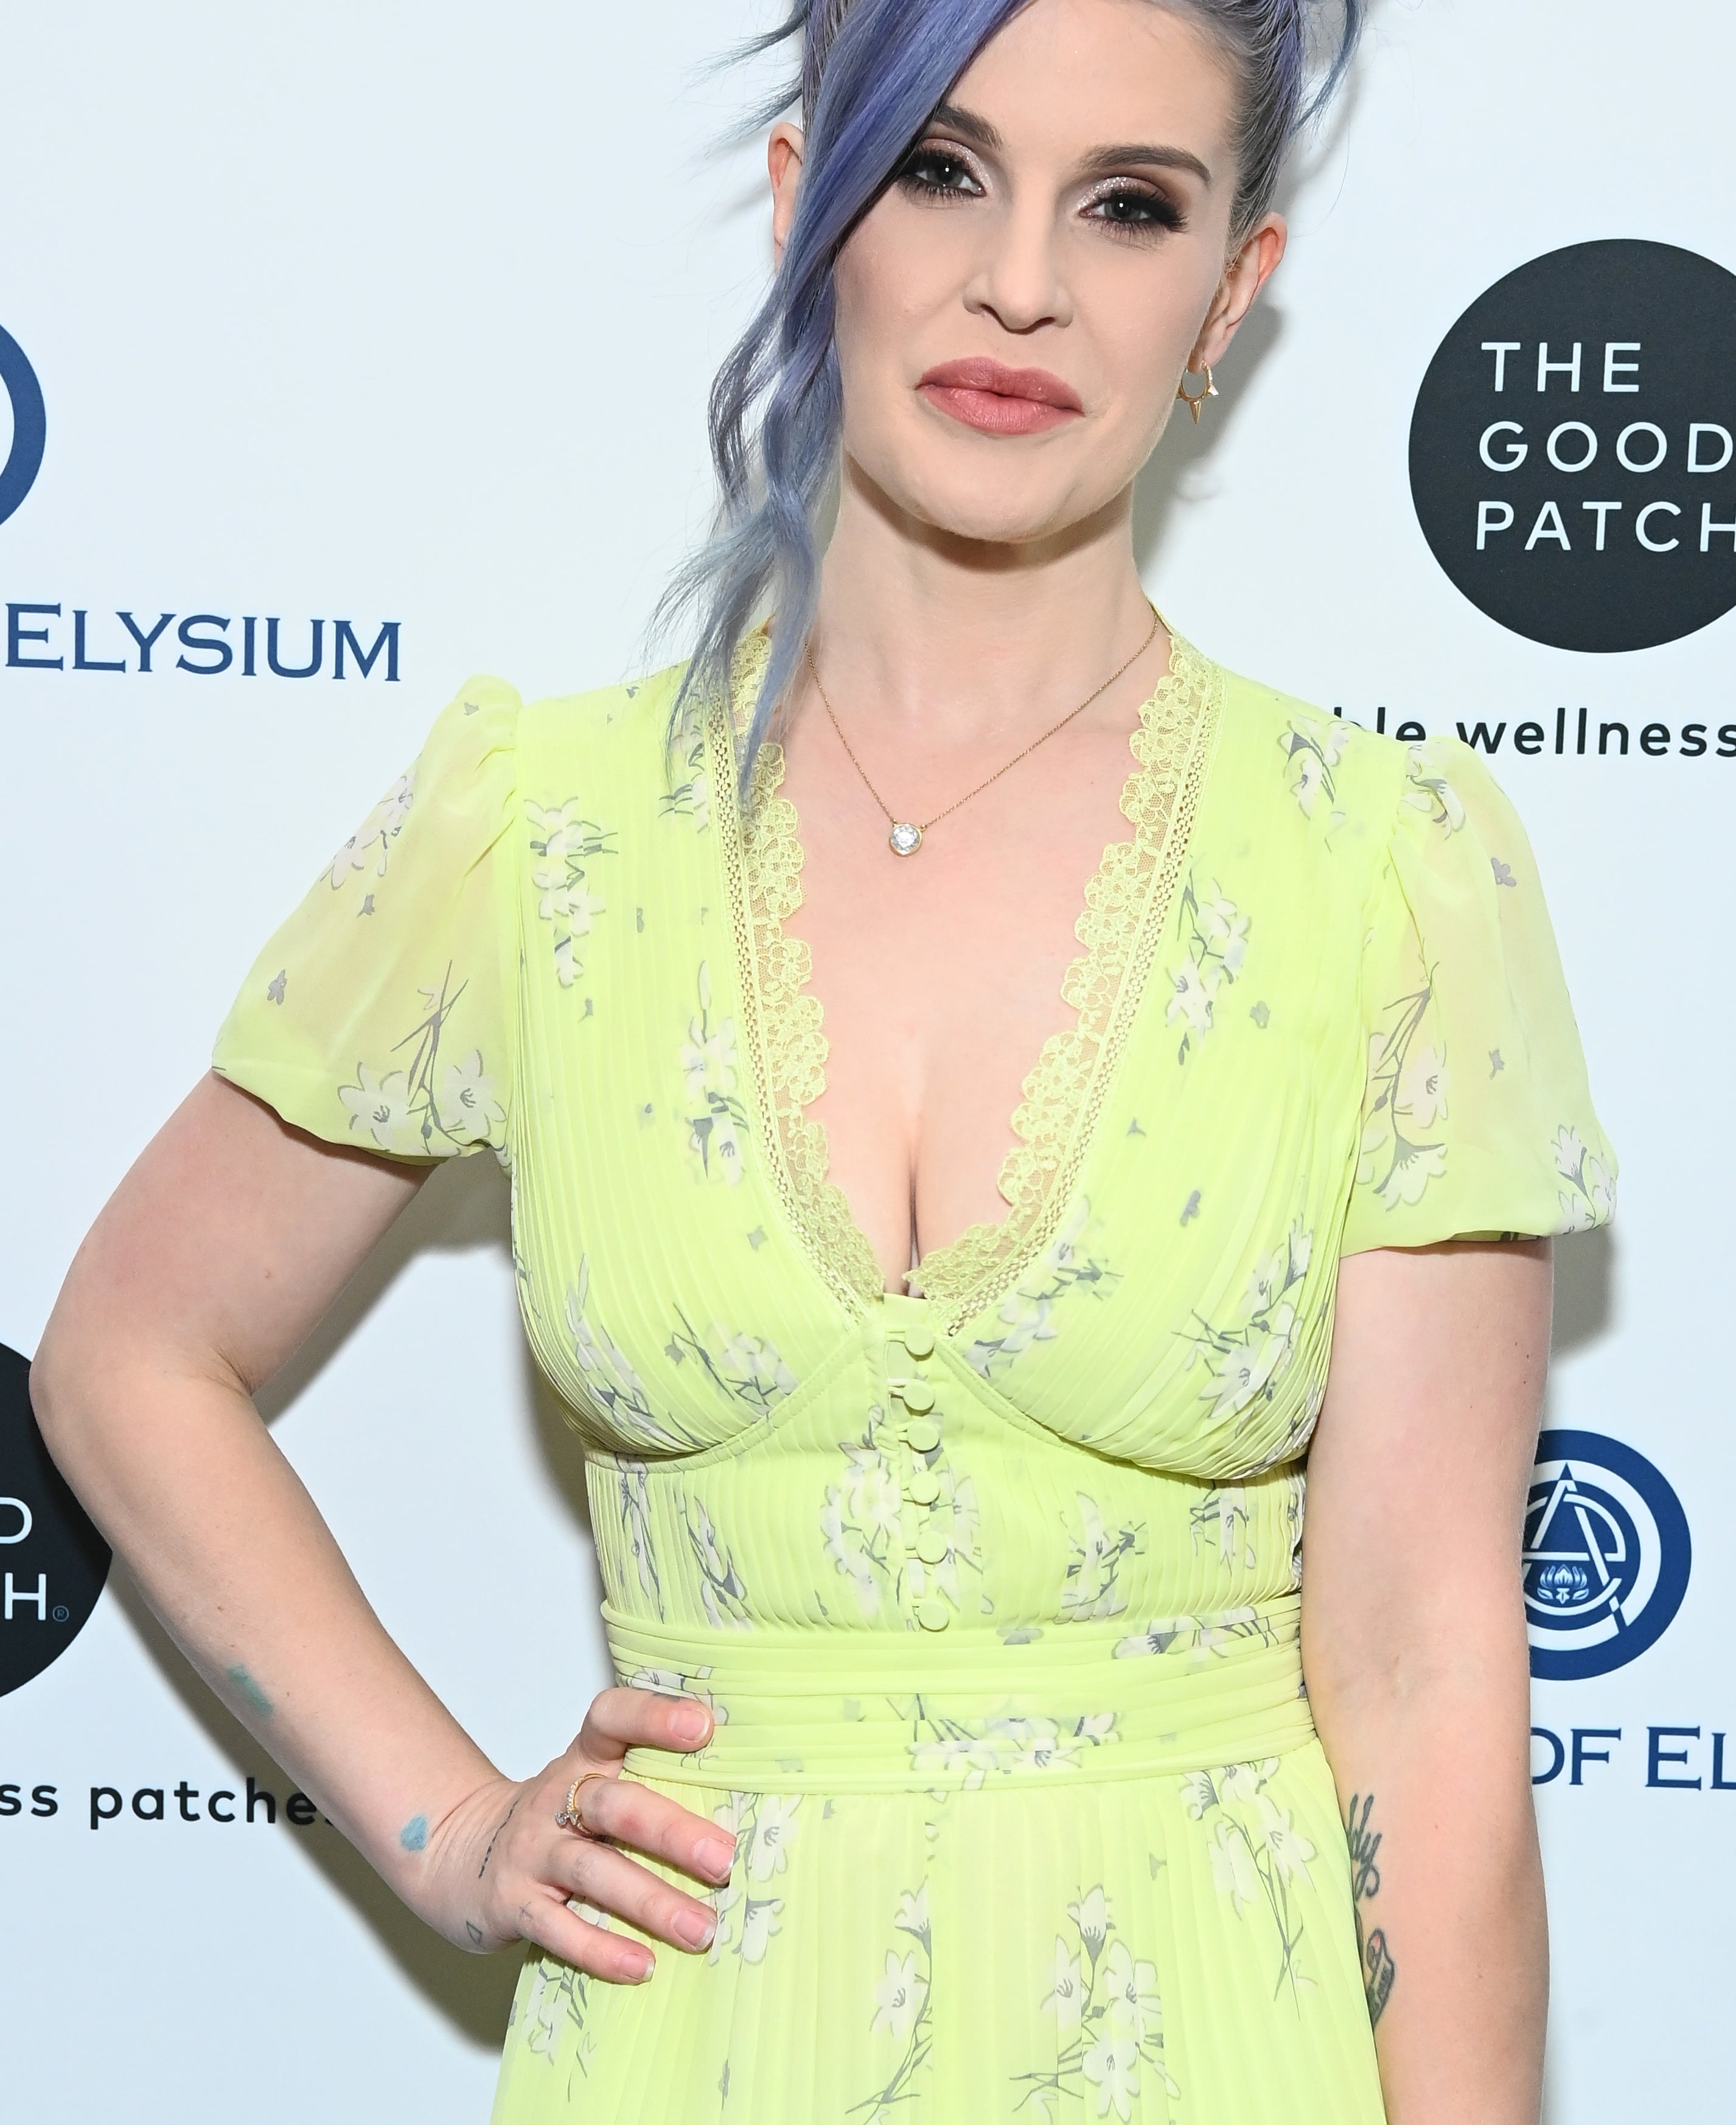 Kelly Osbourne in a yellow floral dress and with blue-gray hair, at a media event